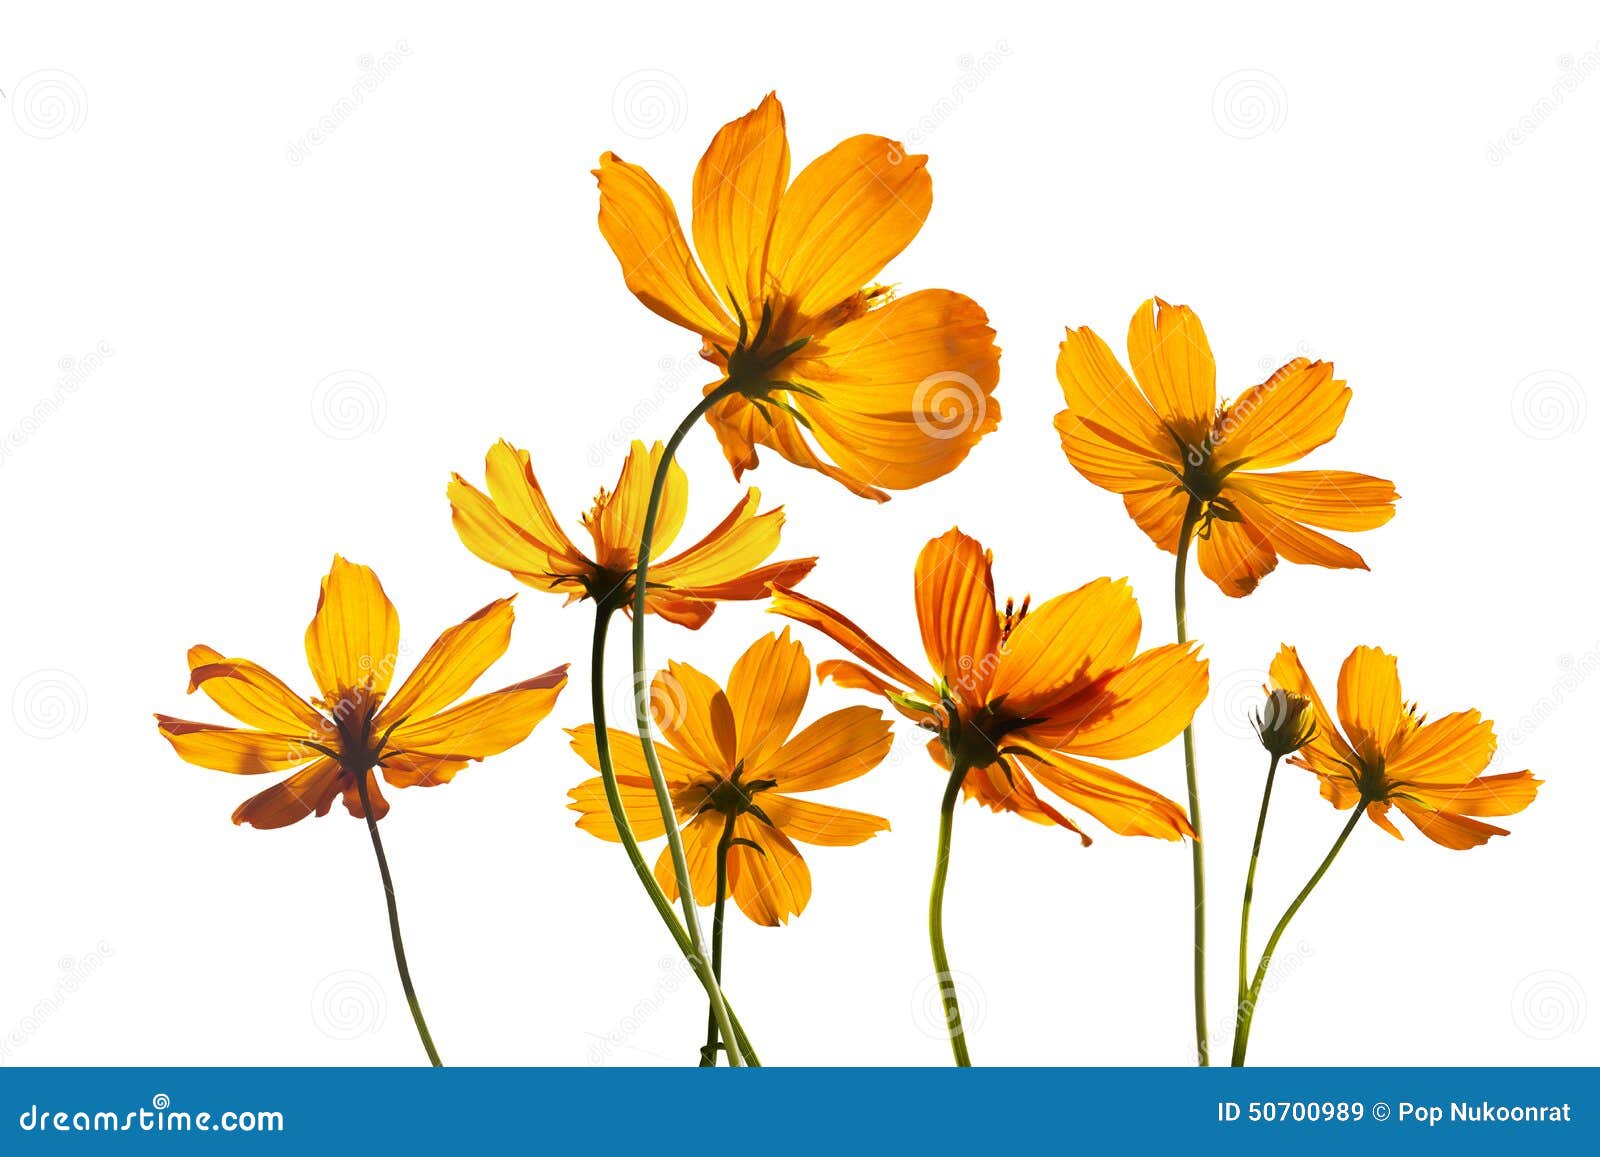 Dried Flowers PNG Image, Beautiful Daisies Flower In Fresh And Dried,  Daisy, Flower, Aesthetic Decoration PNG Image For Free Download